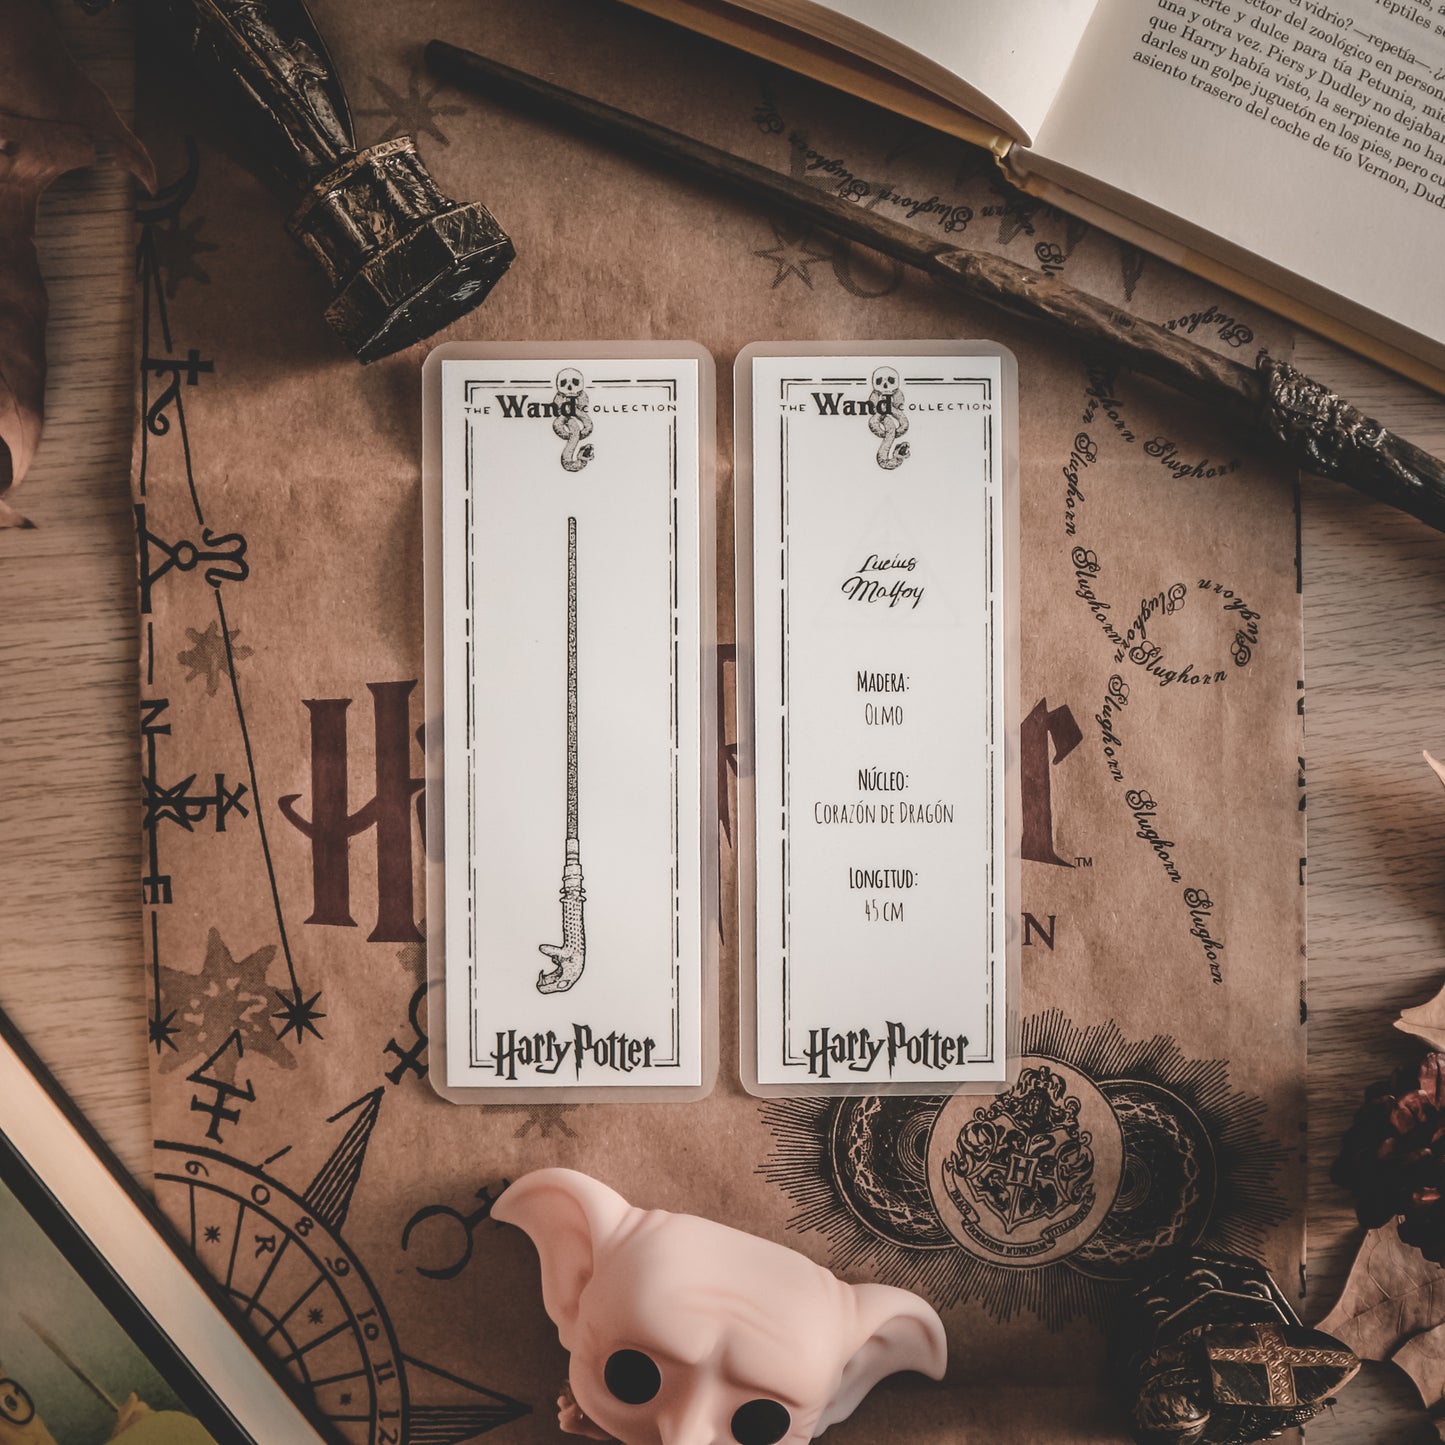 Bookmark - The Wand Collection "Death Eaters"